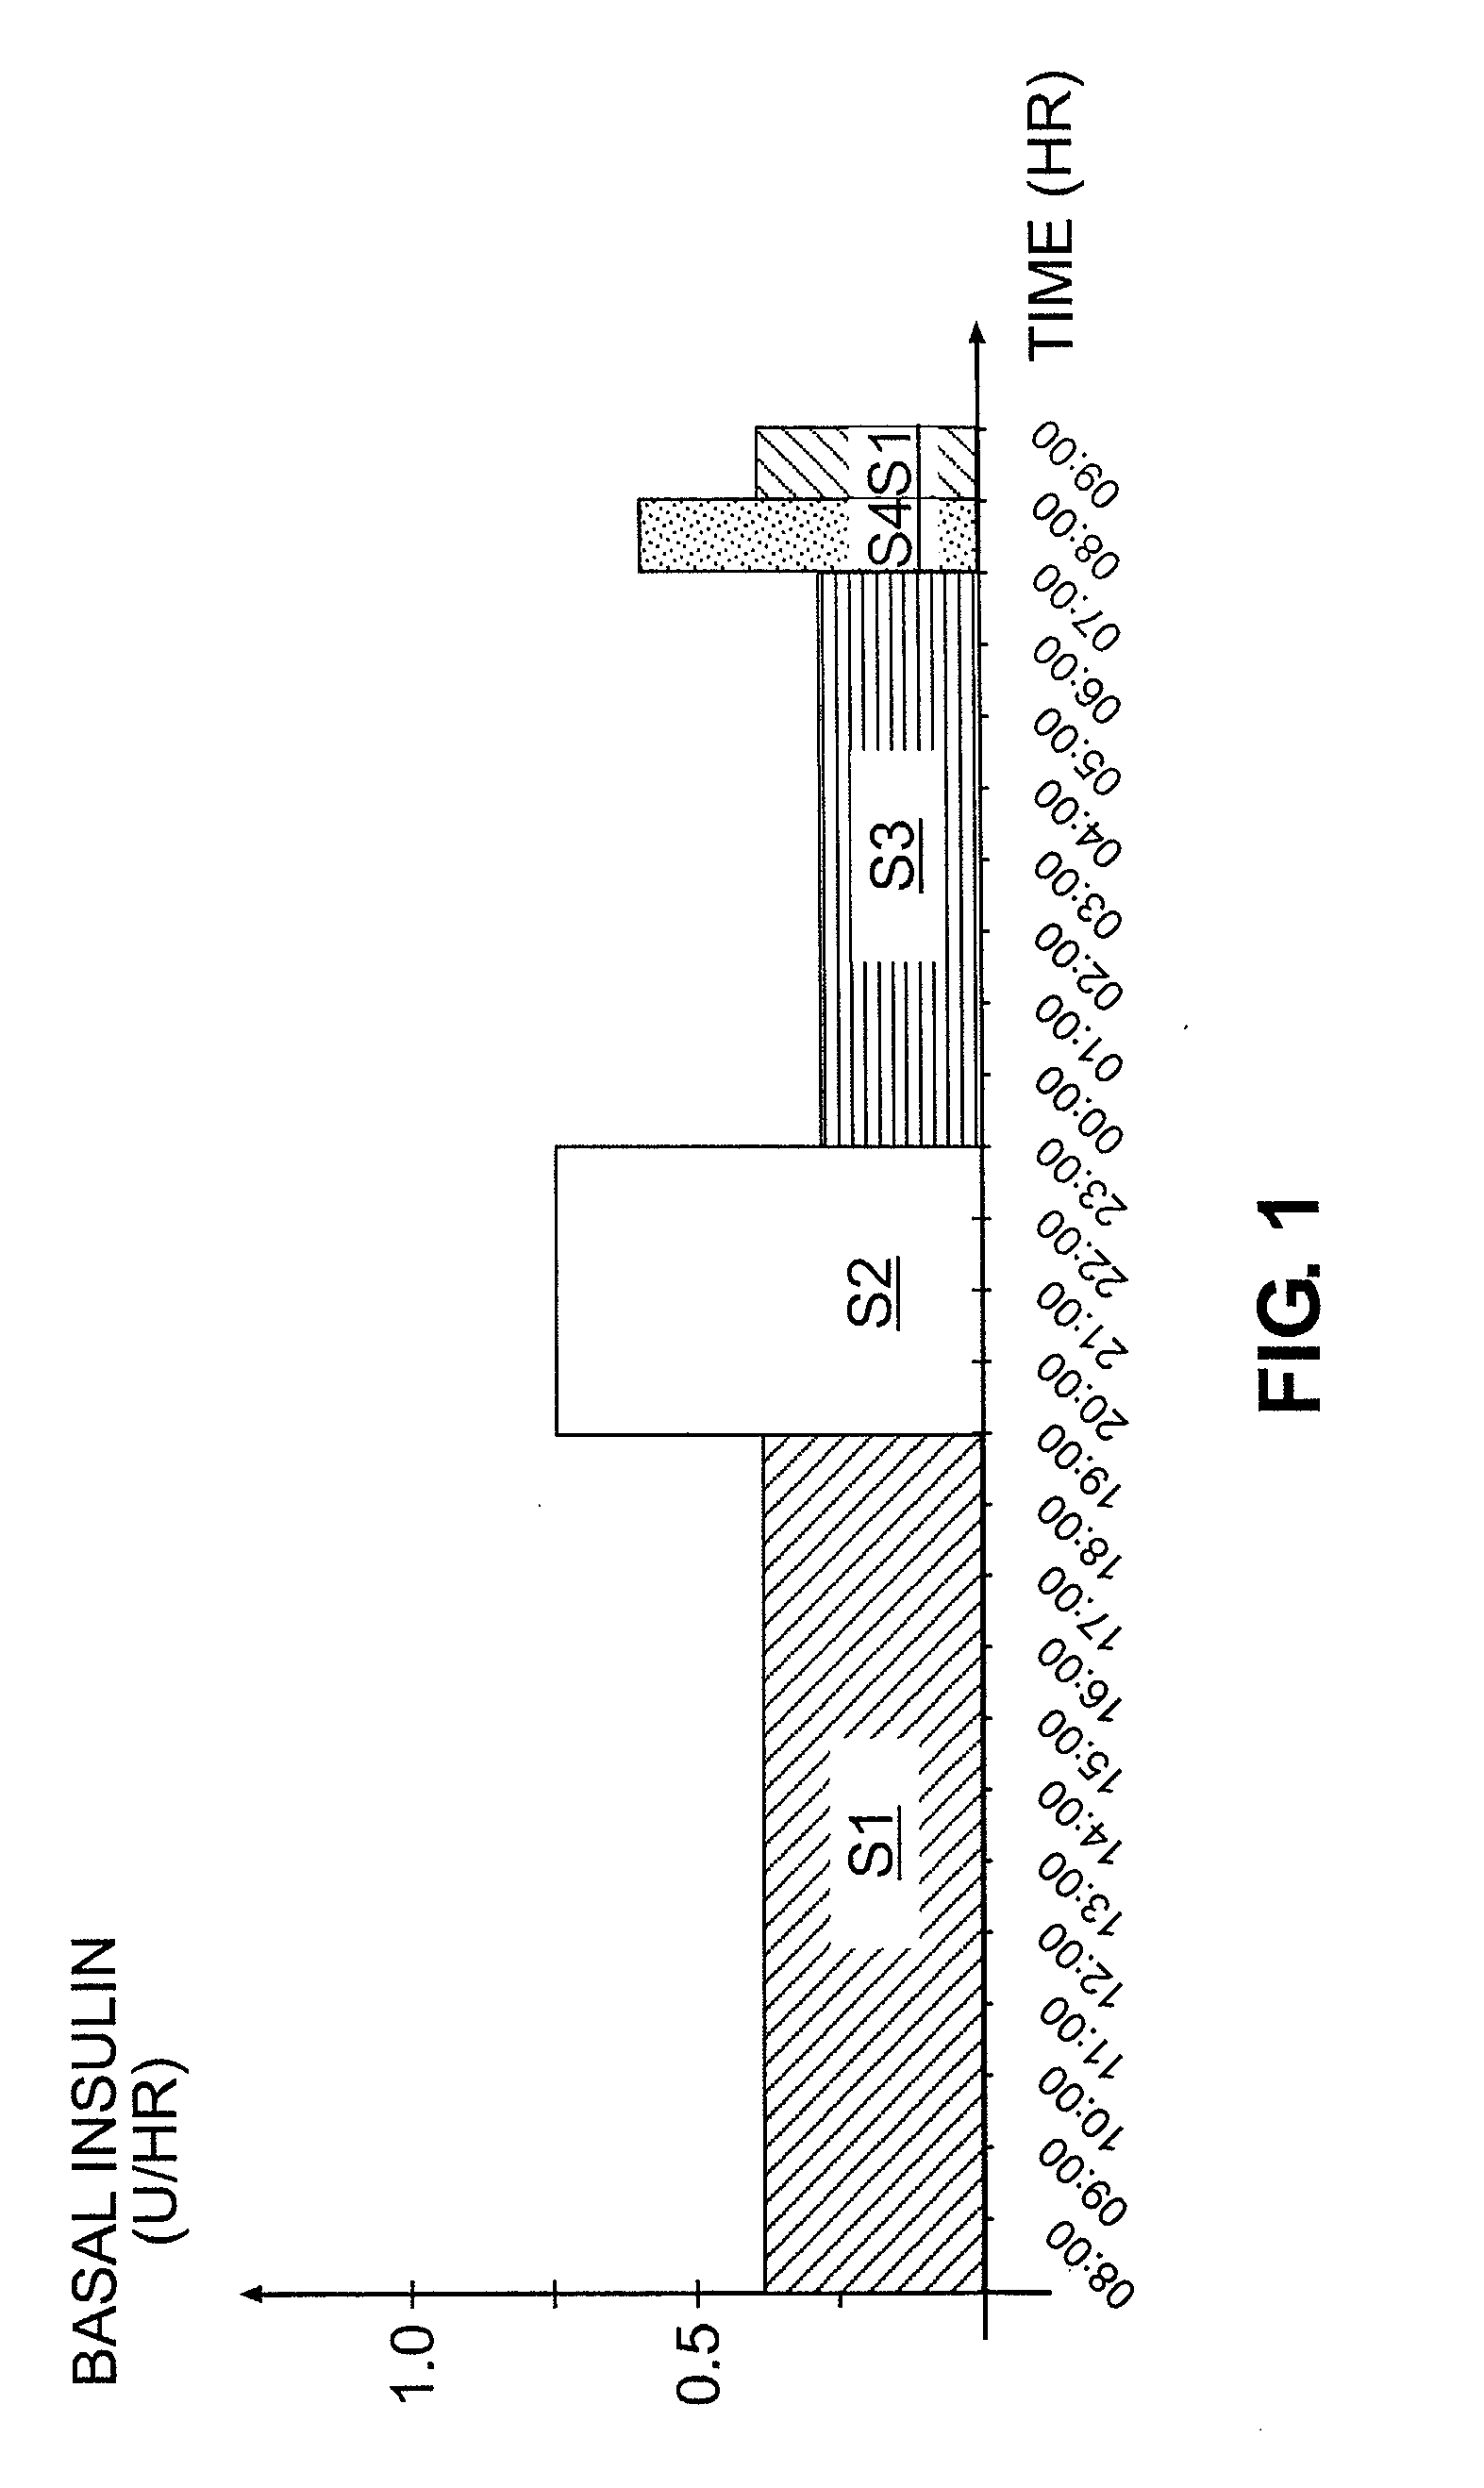 Tailored Basal Insulin Delivery System and Method